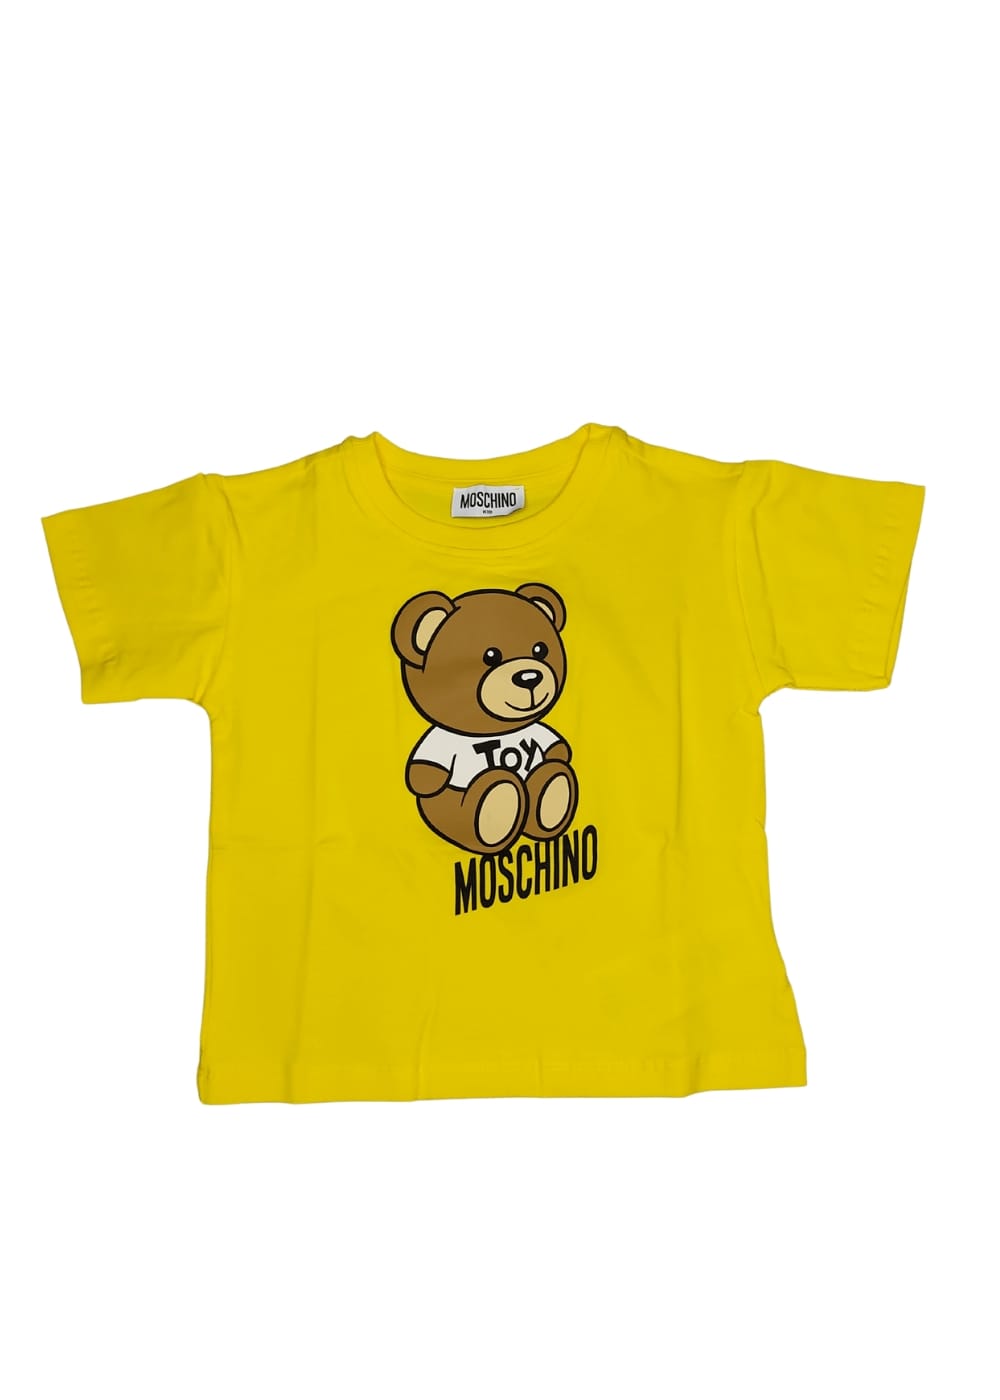 Featured image for “Moschino T-shirt Stampa Teddy Bear”